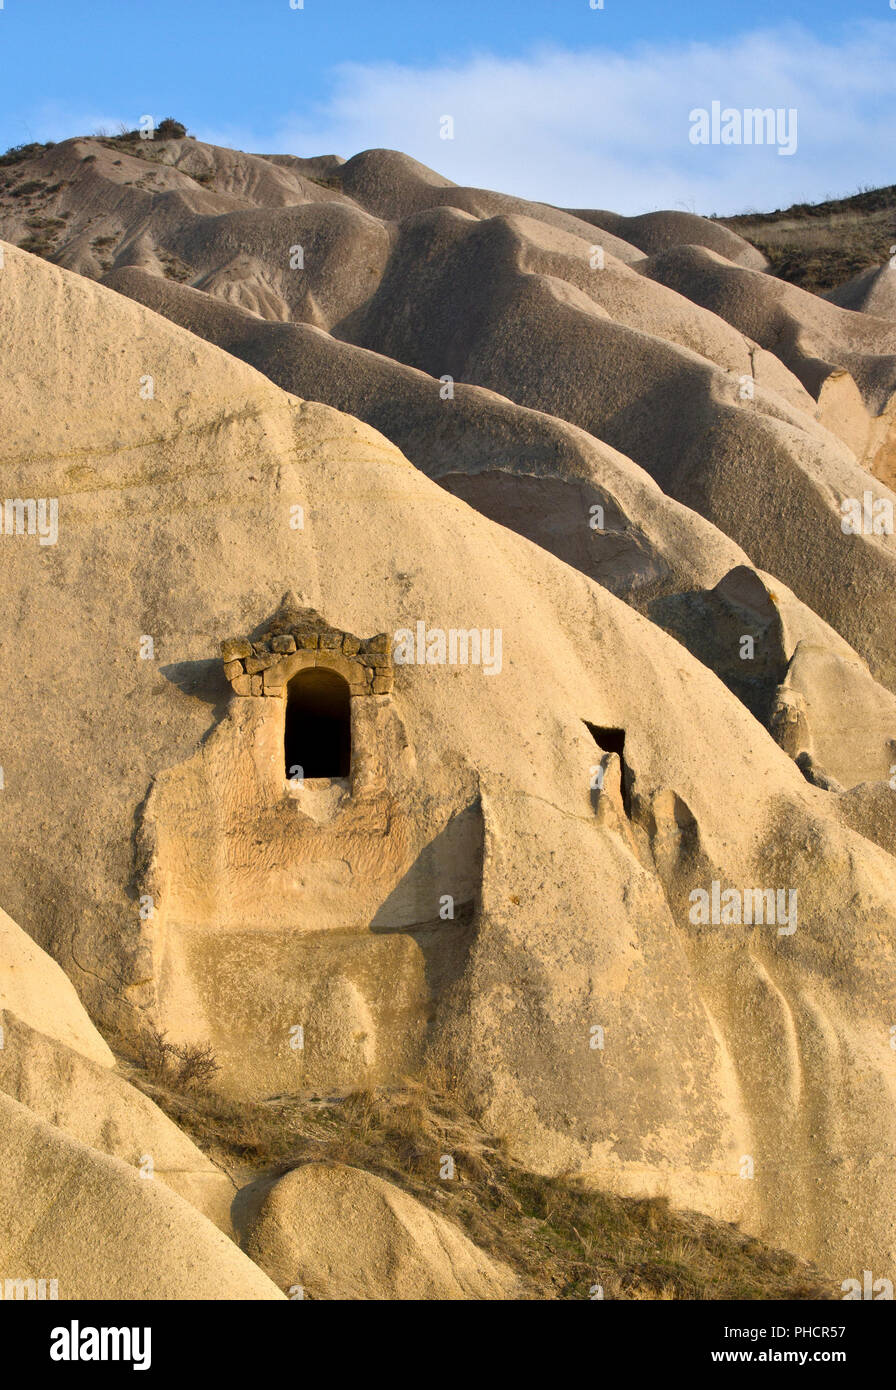 Ancient dwelling built into a hillside in the Rose Valley, Cappadocia, Turkey Stock Photo